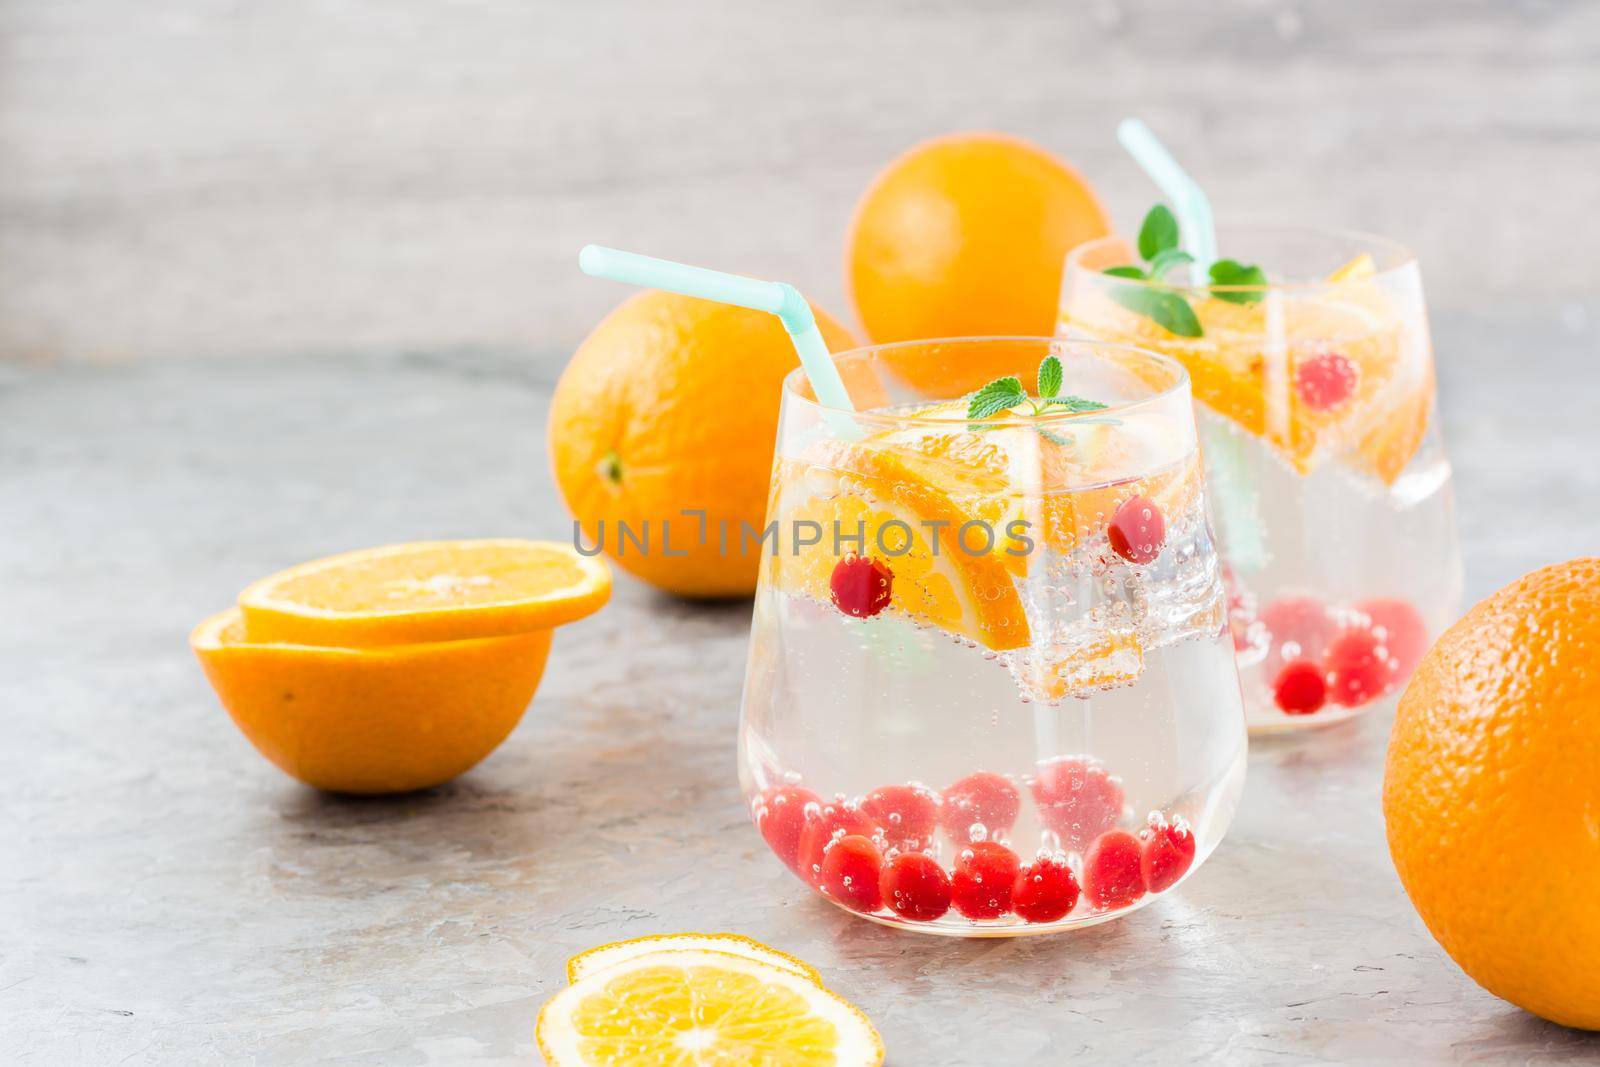 Hard seltzer cocktail with orange, cranberry and mint in glasses and cut oranges on the table. Alcoholic highly carbonated drink